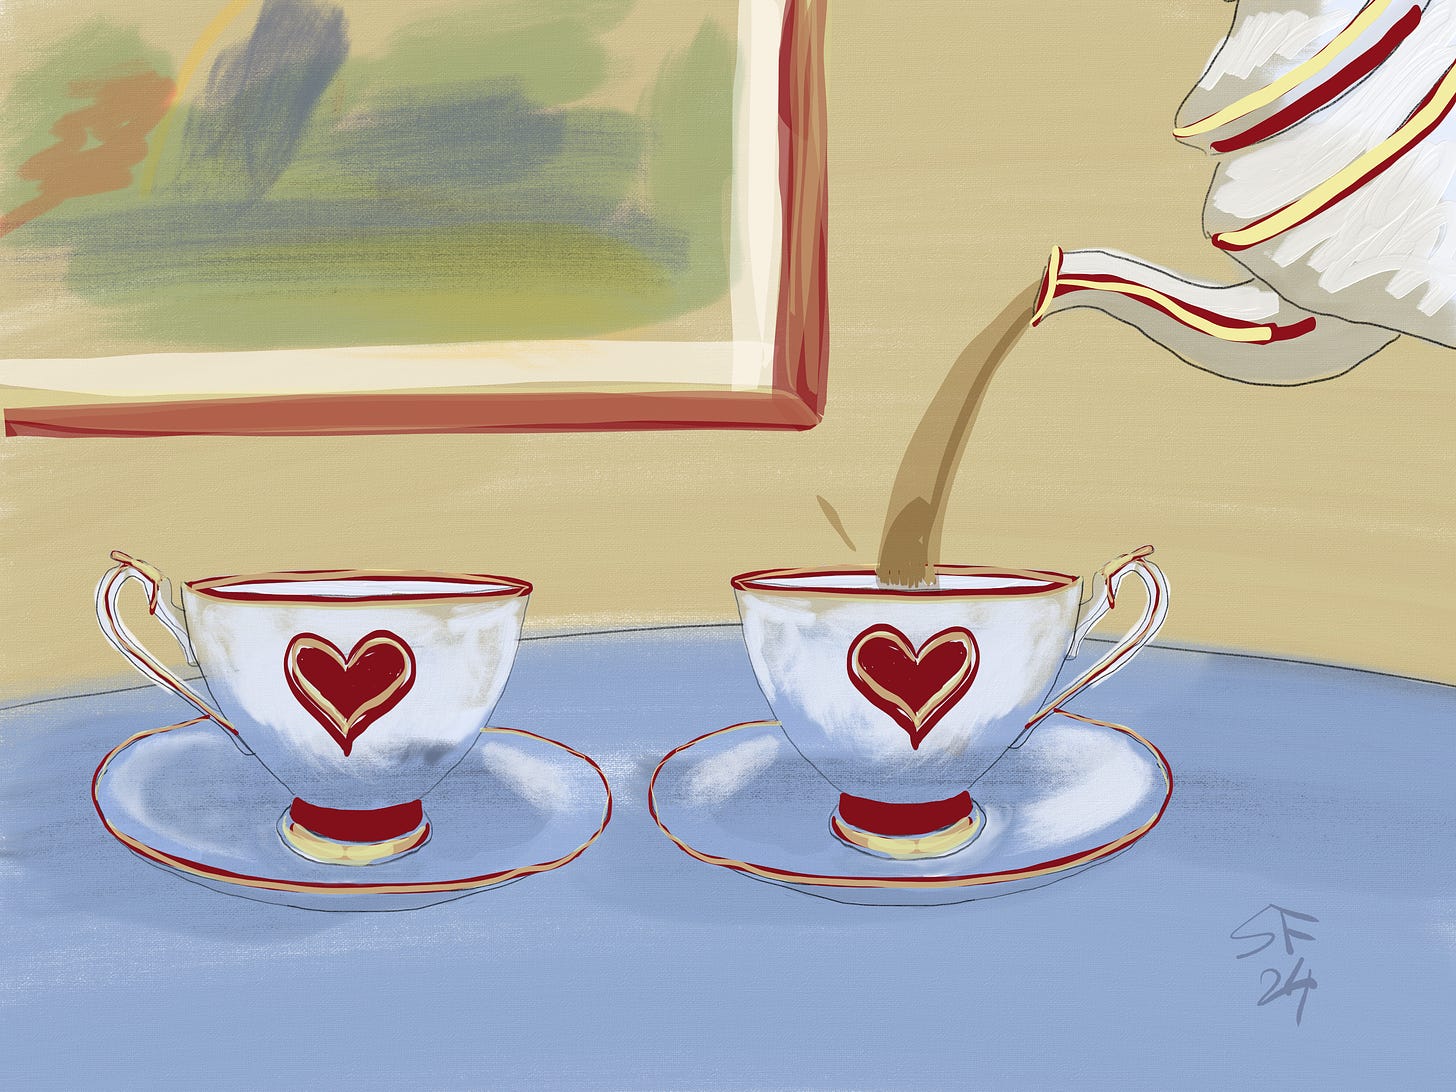 Oil sketch: two ornate china teacups and saucers with heart motifs on a table; tea being poured from a teapot into the right-hand cup. In the background, a corner of a painting on the wall.